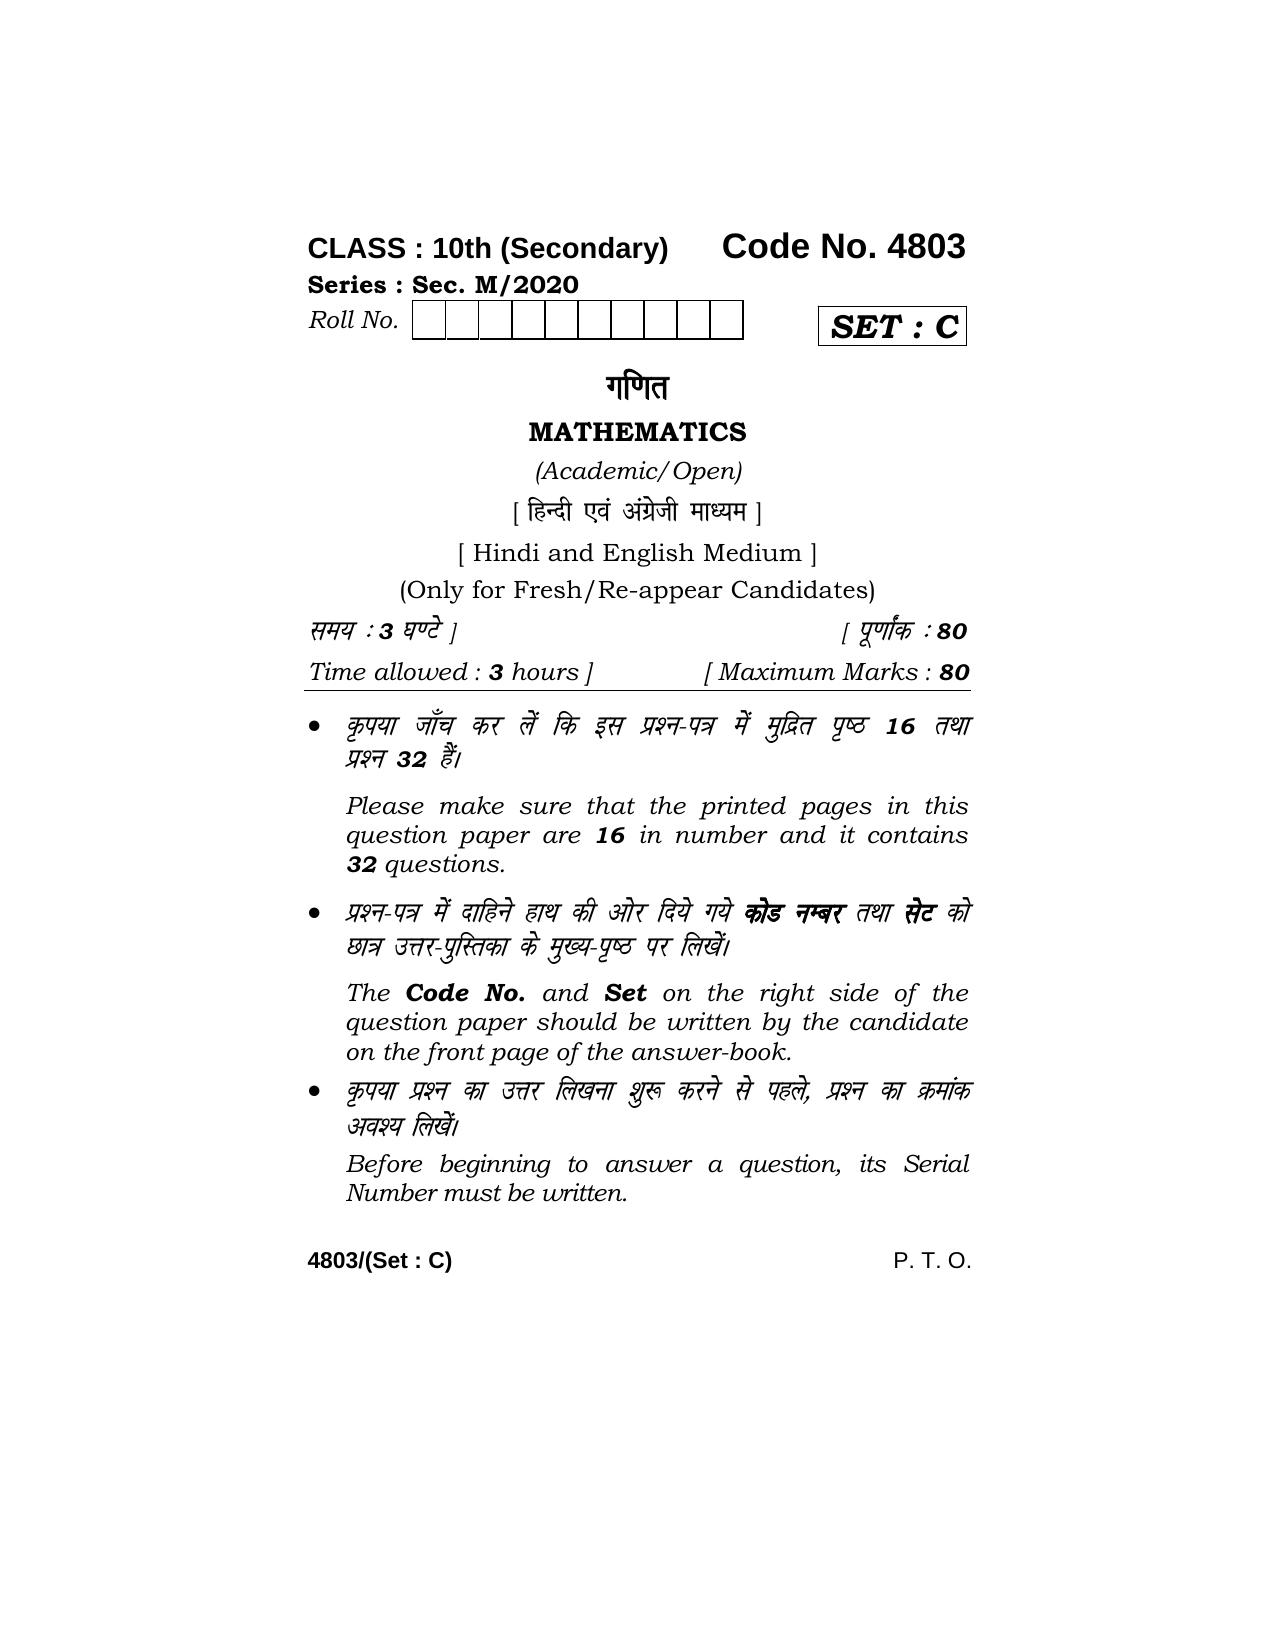 Haryana Board HBSE Class 10 Mathematics 2020 Question Paper - Page 33